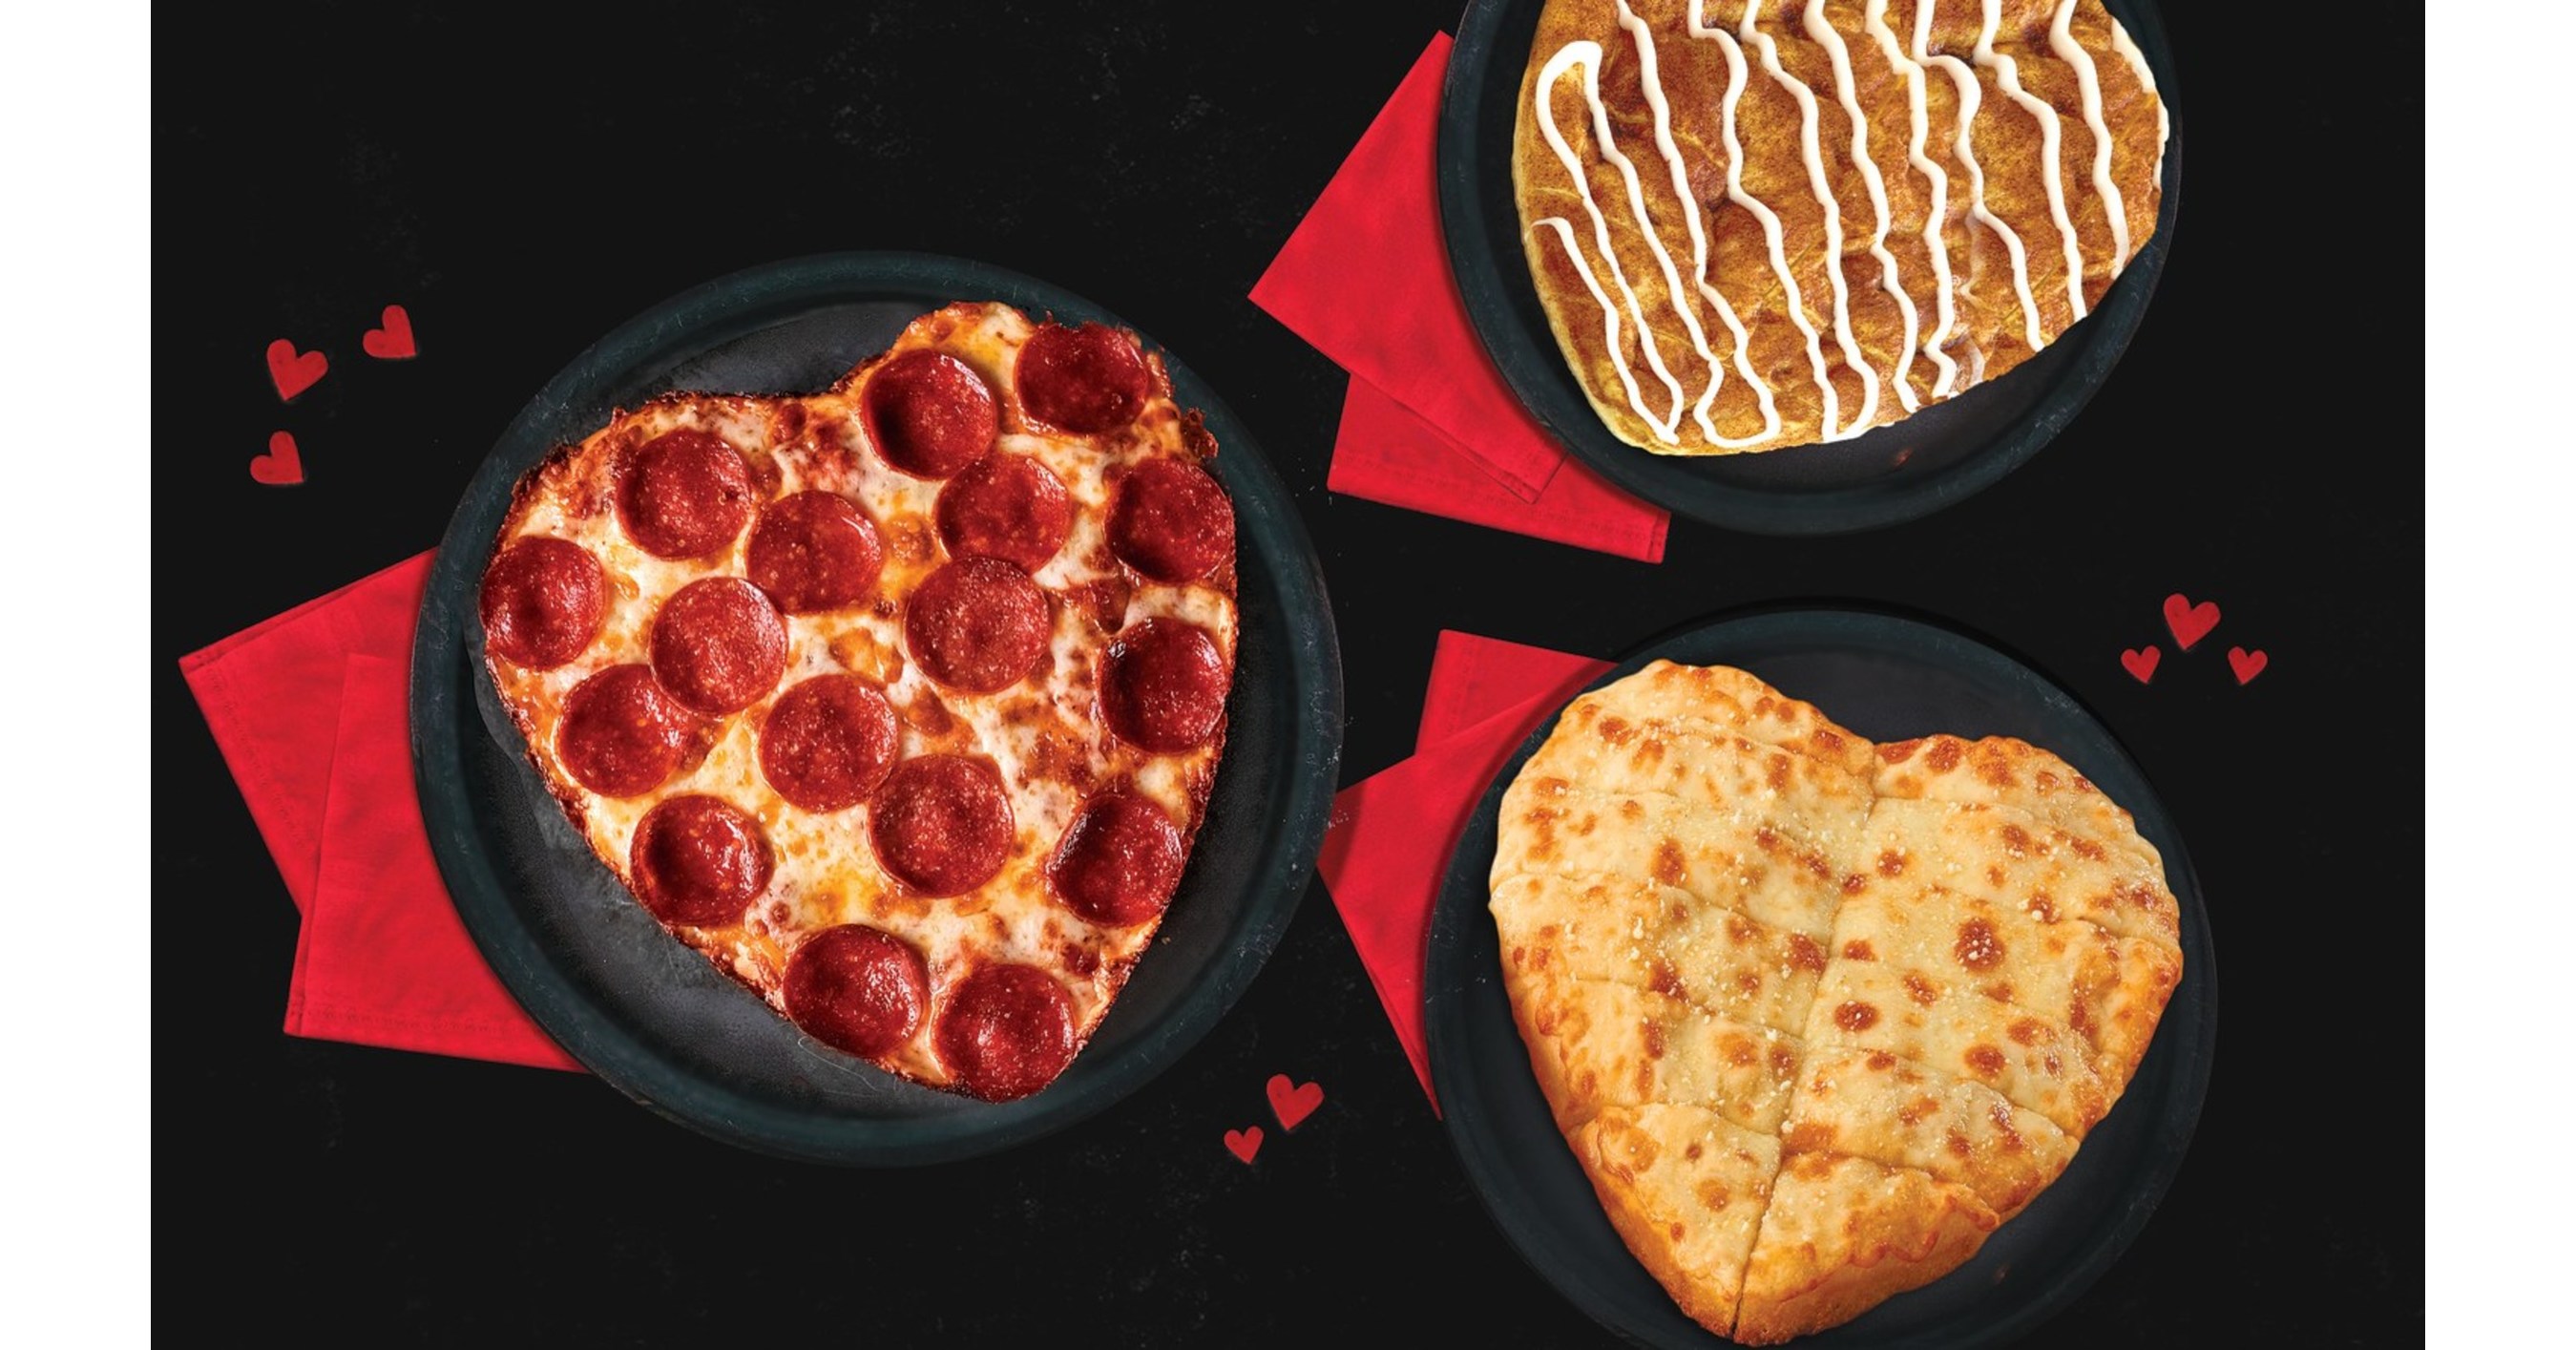 Share the Love on Valentine's Day with Jet's Pizza®